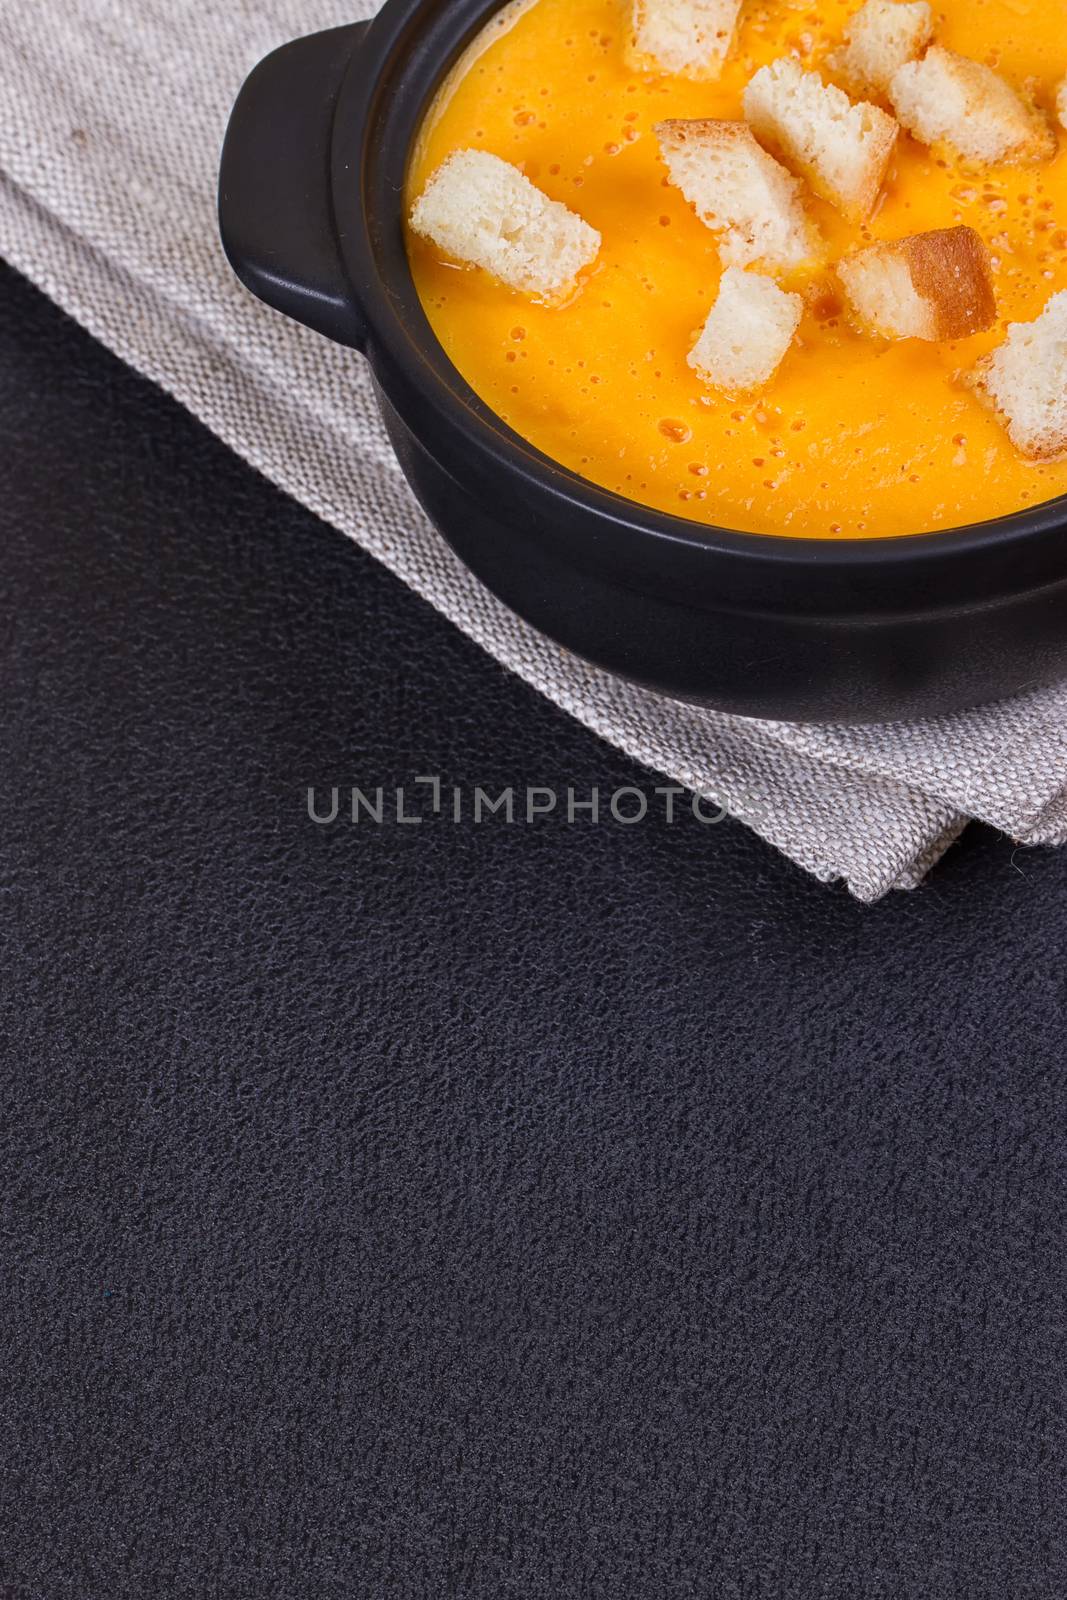 Pumpkin and carrot soup with cream and parsley on dark background Copy space